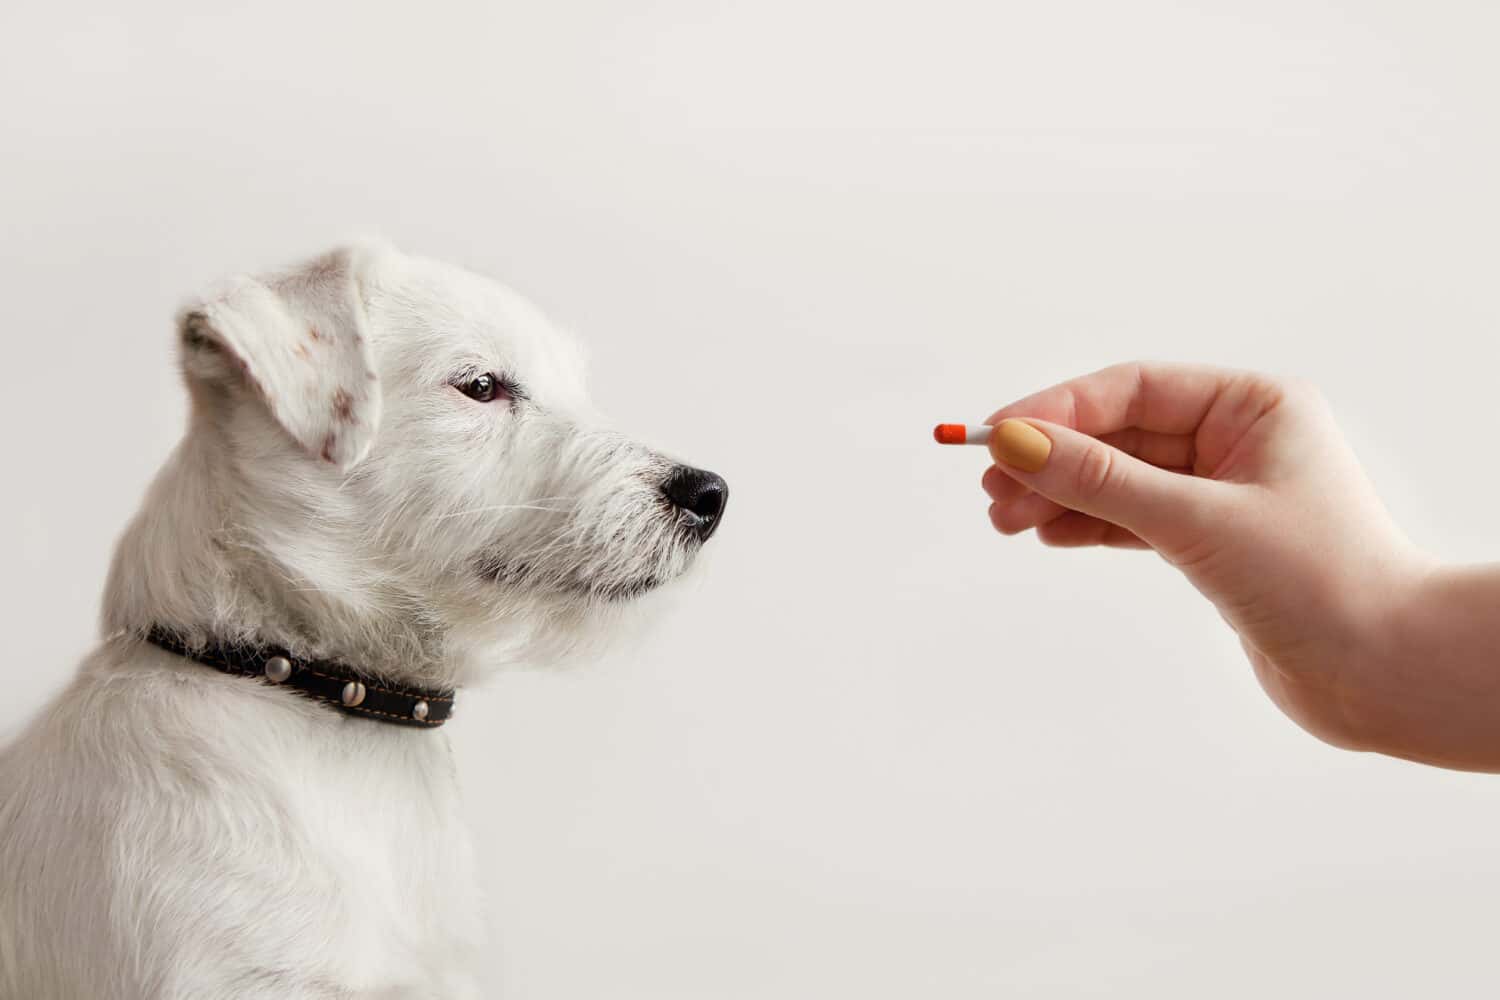 Sick dog Jack Russell Terrier waiting get pill from hand of owner or doctor. Pet health care, veterinary drugs, treatments, medical food supplement concept